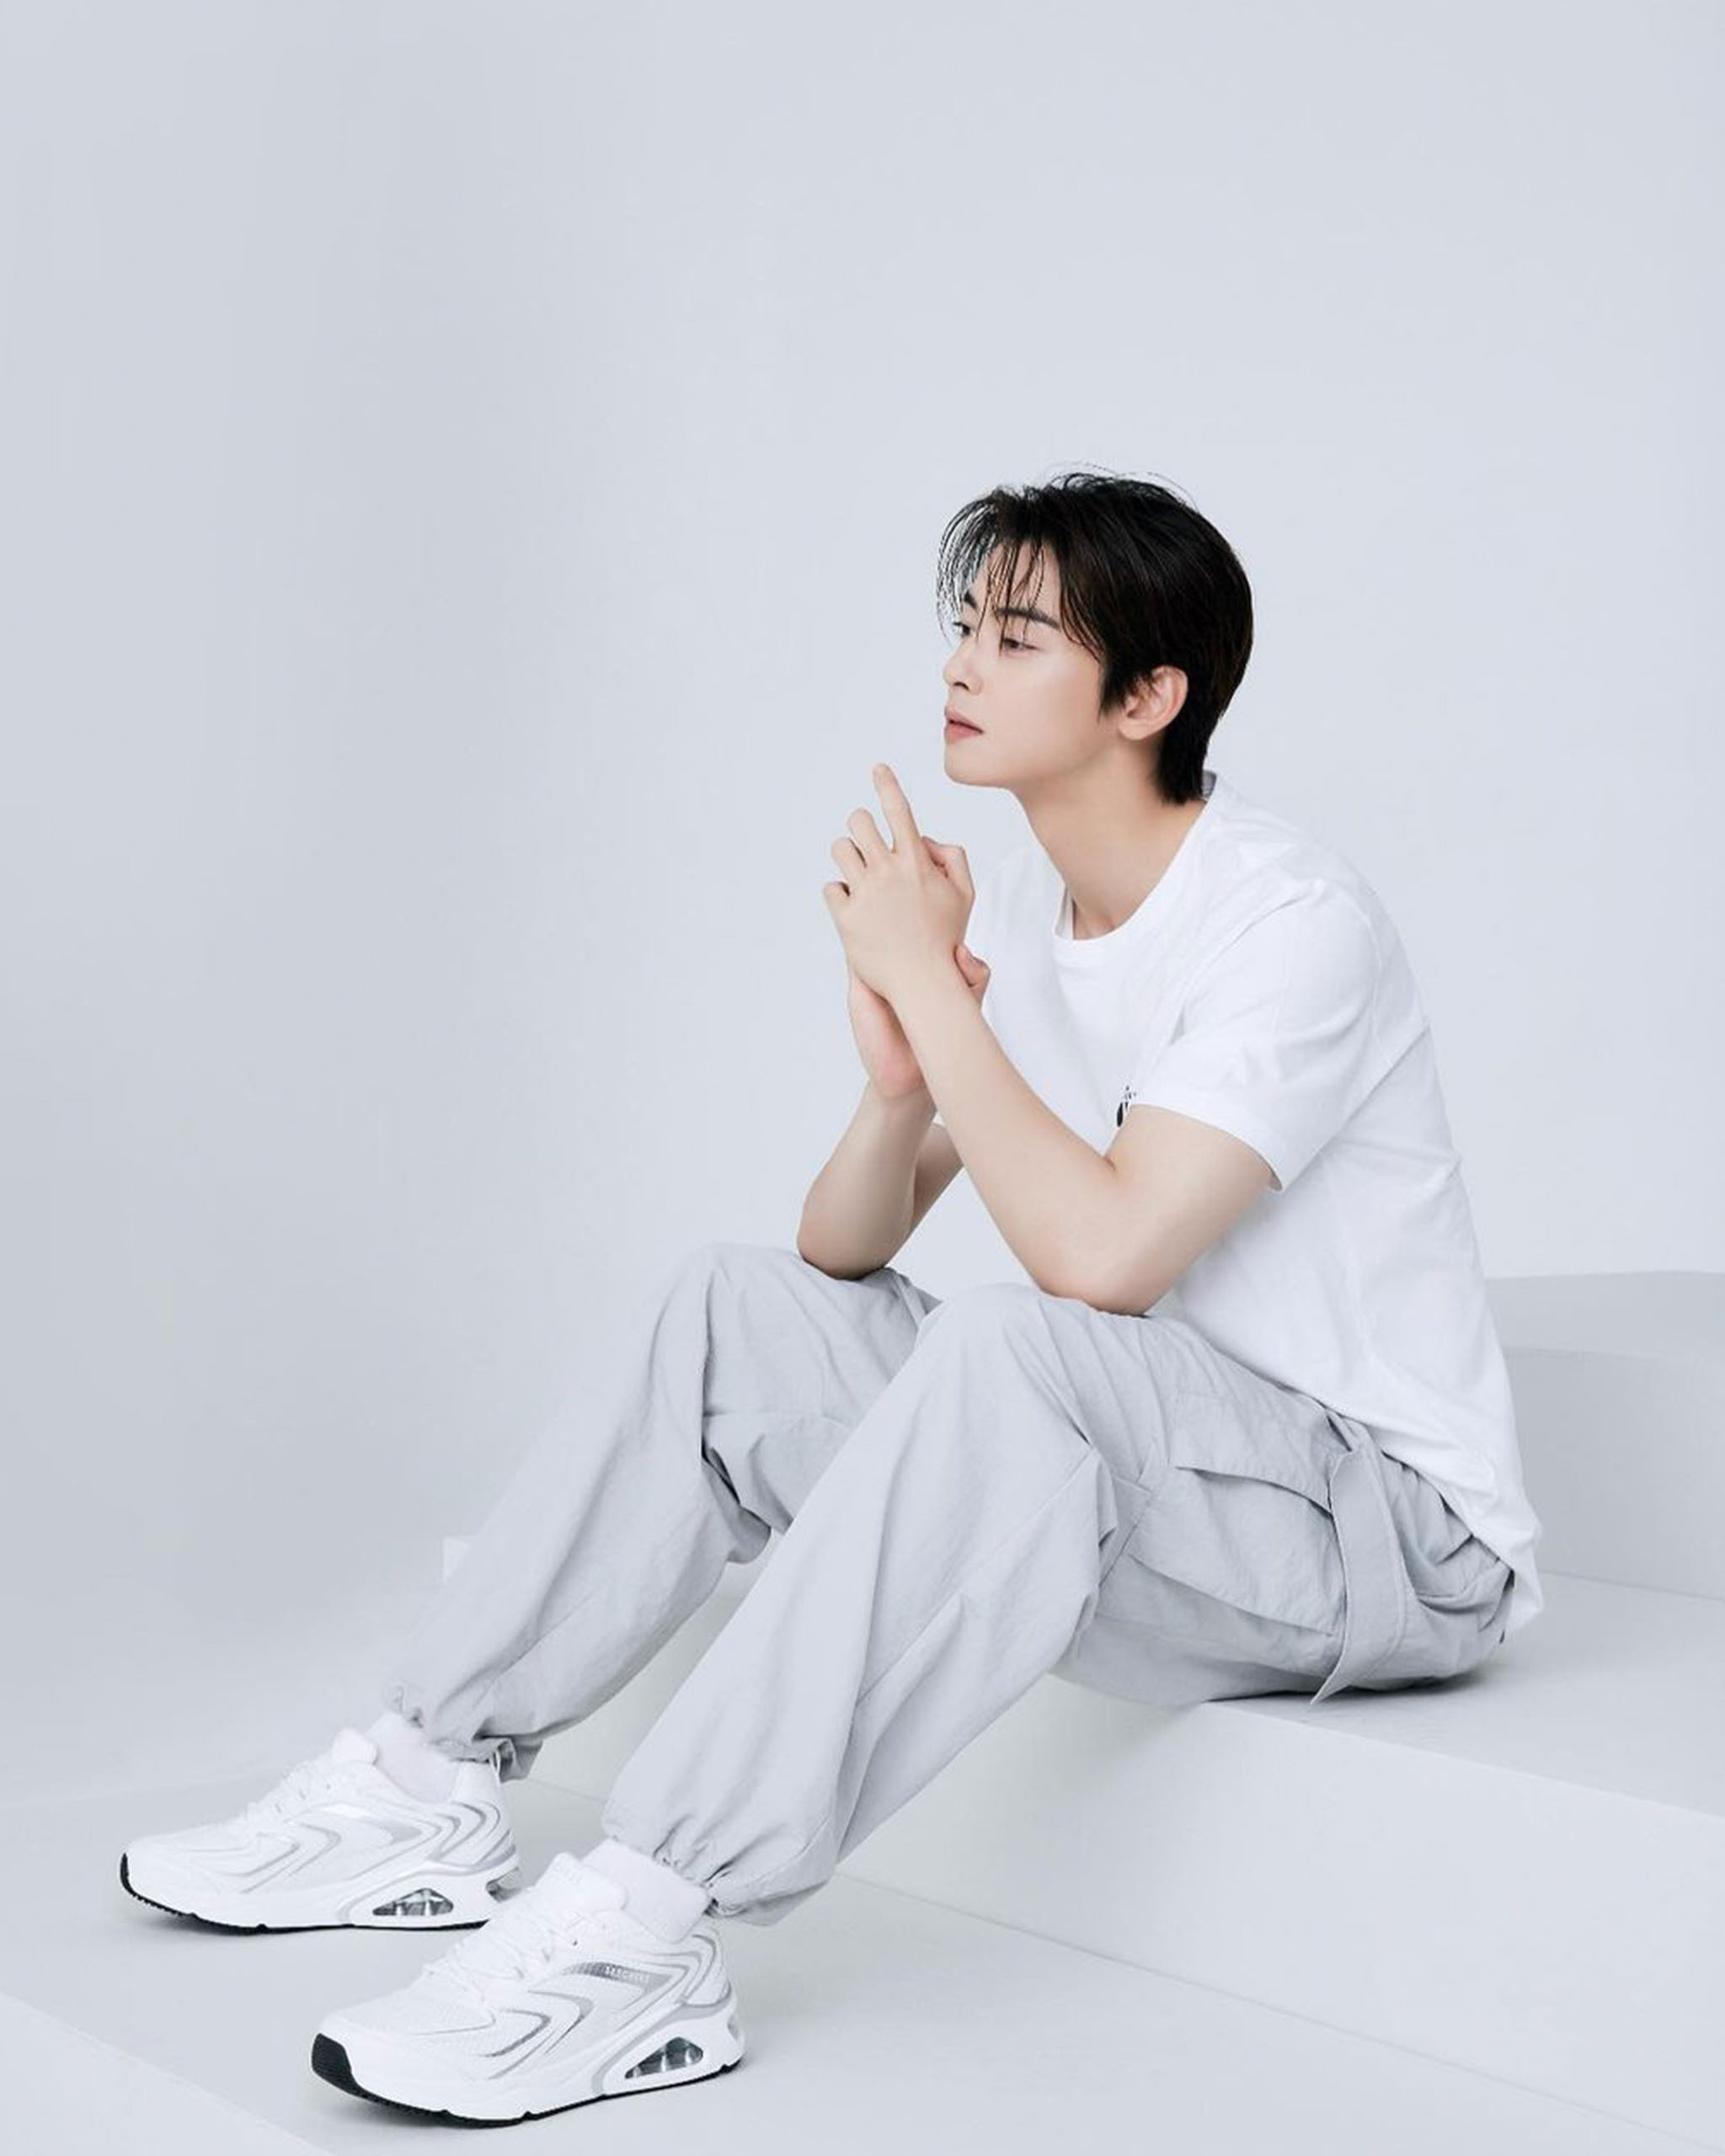 Cha Eun Woo sports a casual cool ensemble for Skechers Tres-Air Uno. Photo courtesy of Skechers